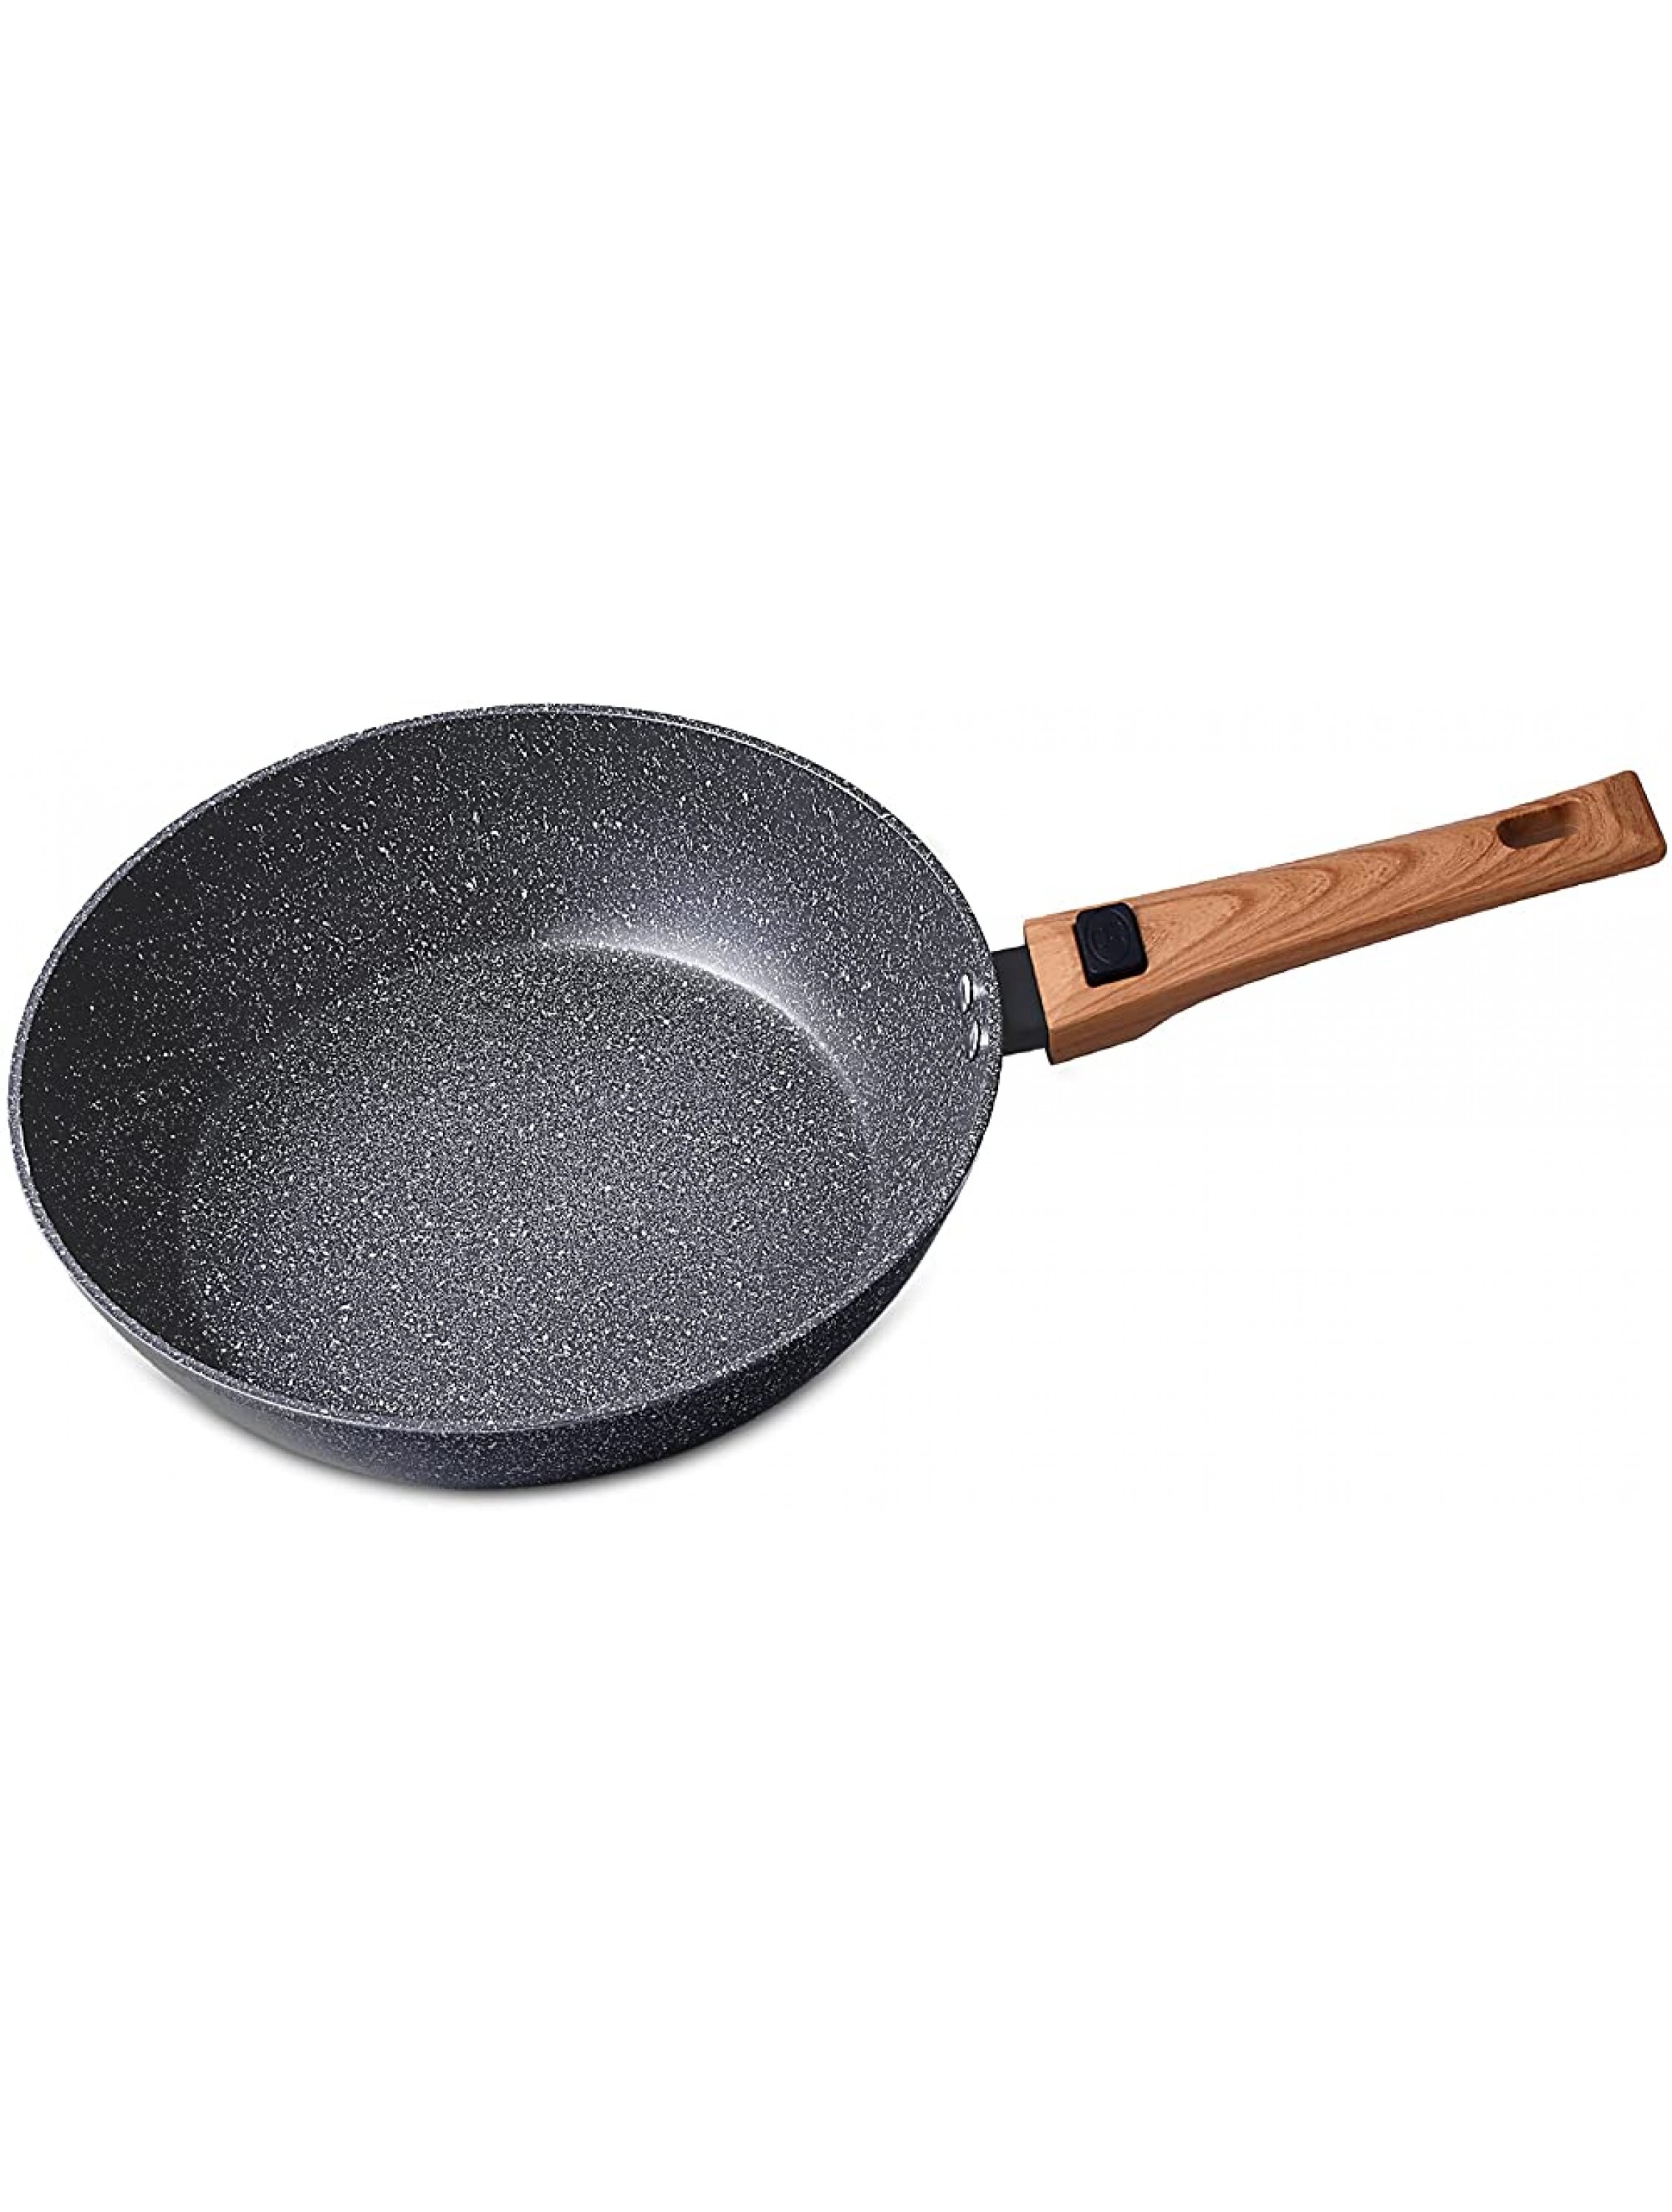 Muyrico Frying Pan Skillet Non Sticking Frying Pans for Cooking Granite Coated Pans with Detachable Handle ，induction Compatible PFOA Free（10 Inch） - BW9OQ0WFG